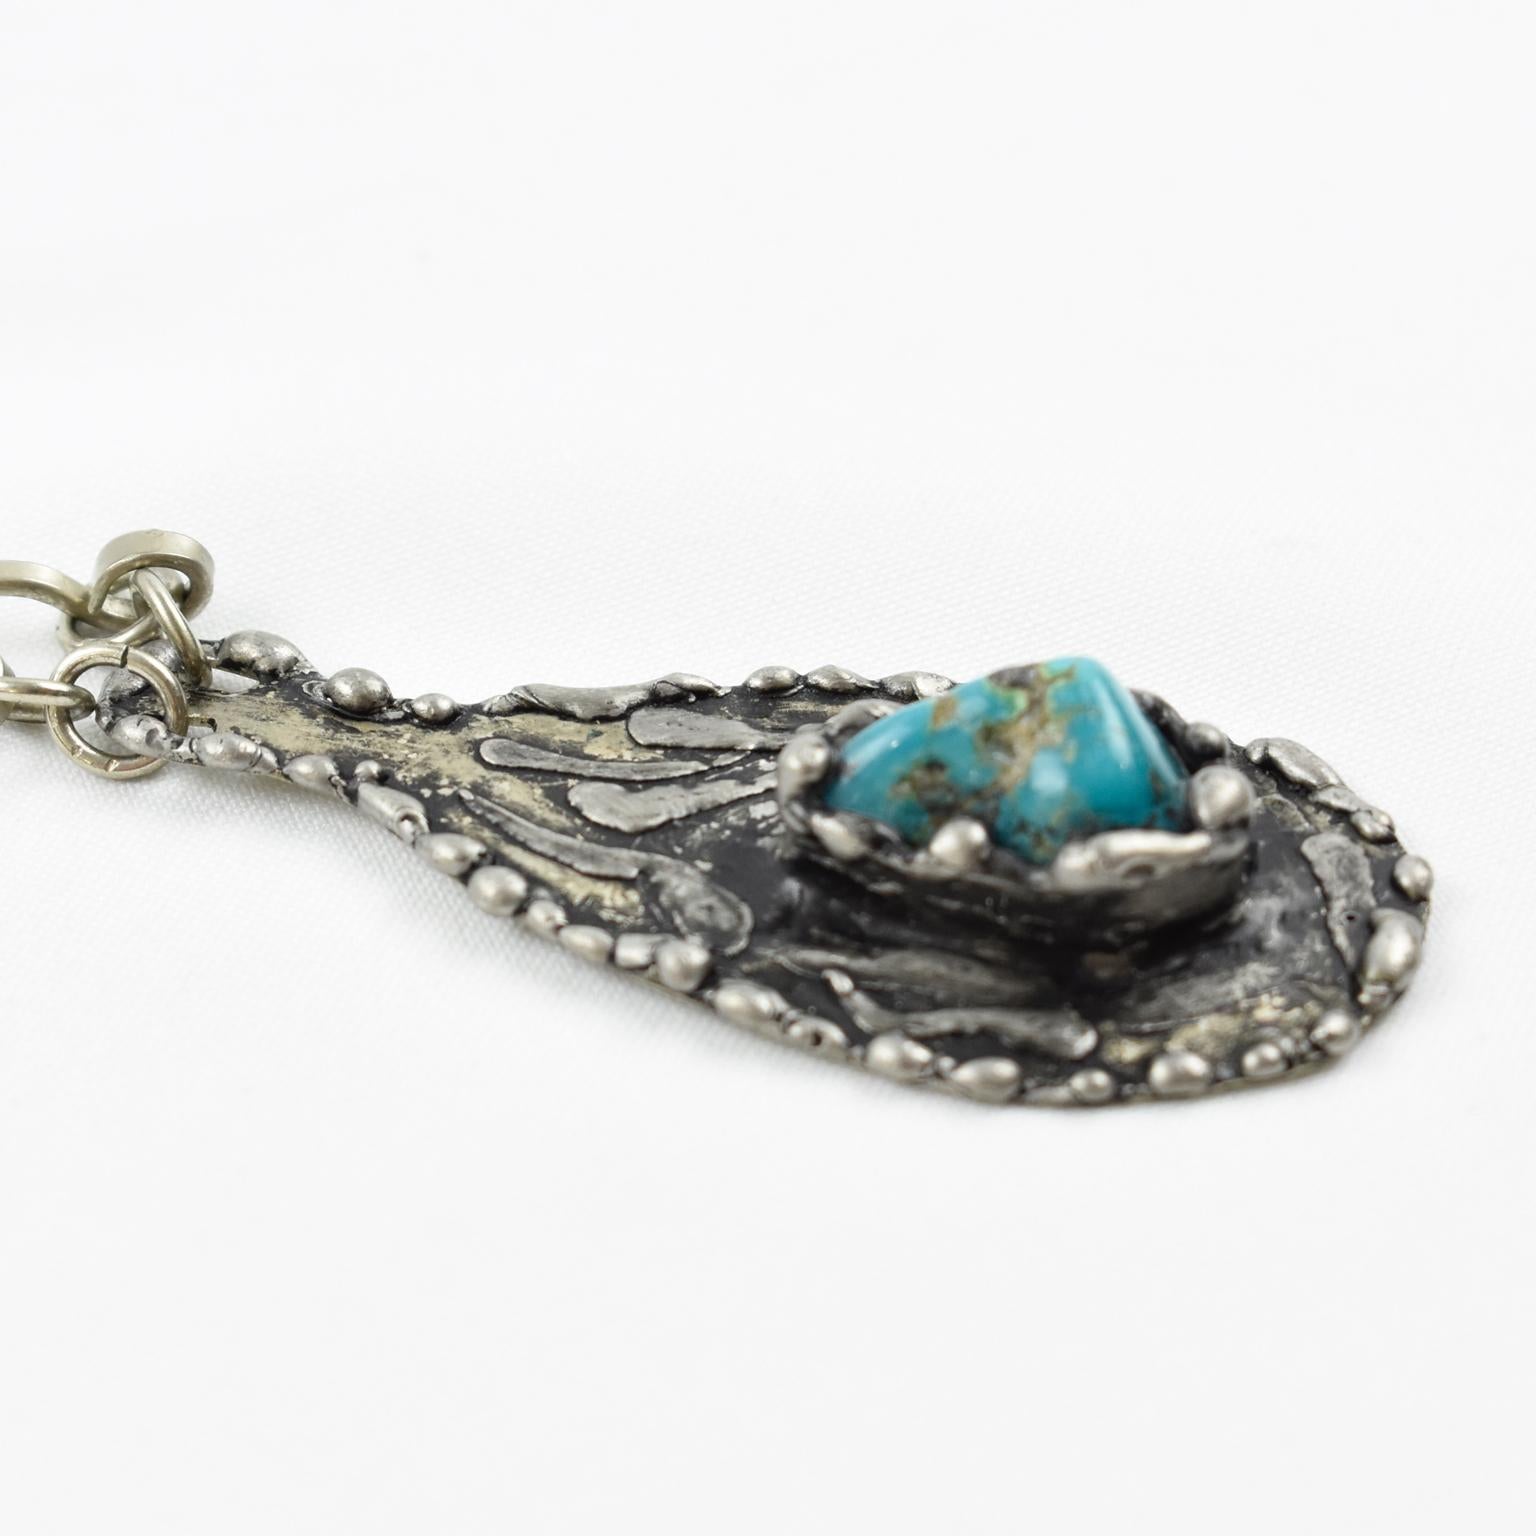 Women's or Men's Brutalist Stainless Steel Long Necklace Turquoise Stone